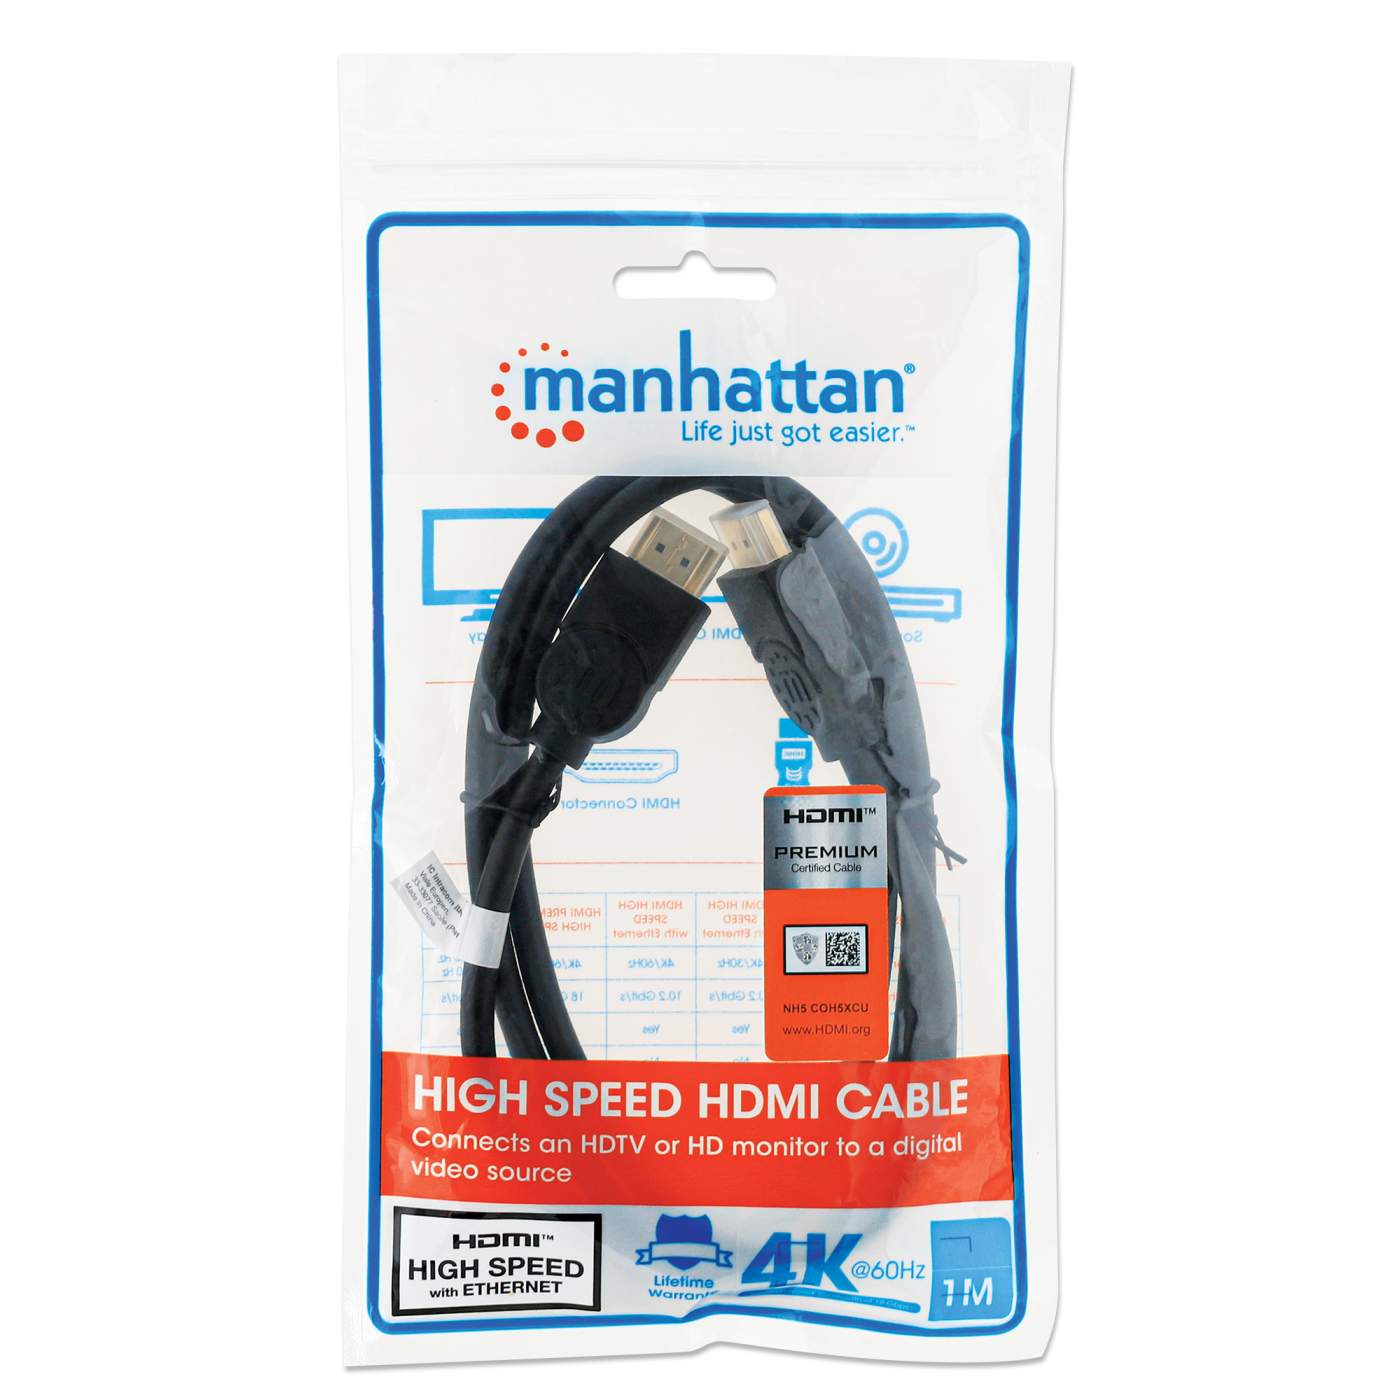 Manhattan High Speed HDMI Cable with Ethernet (323239)